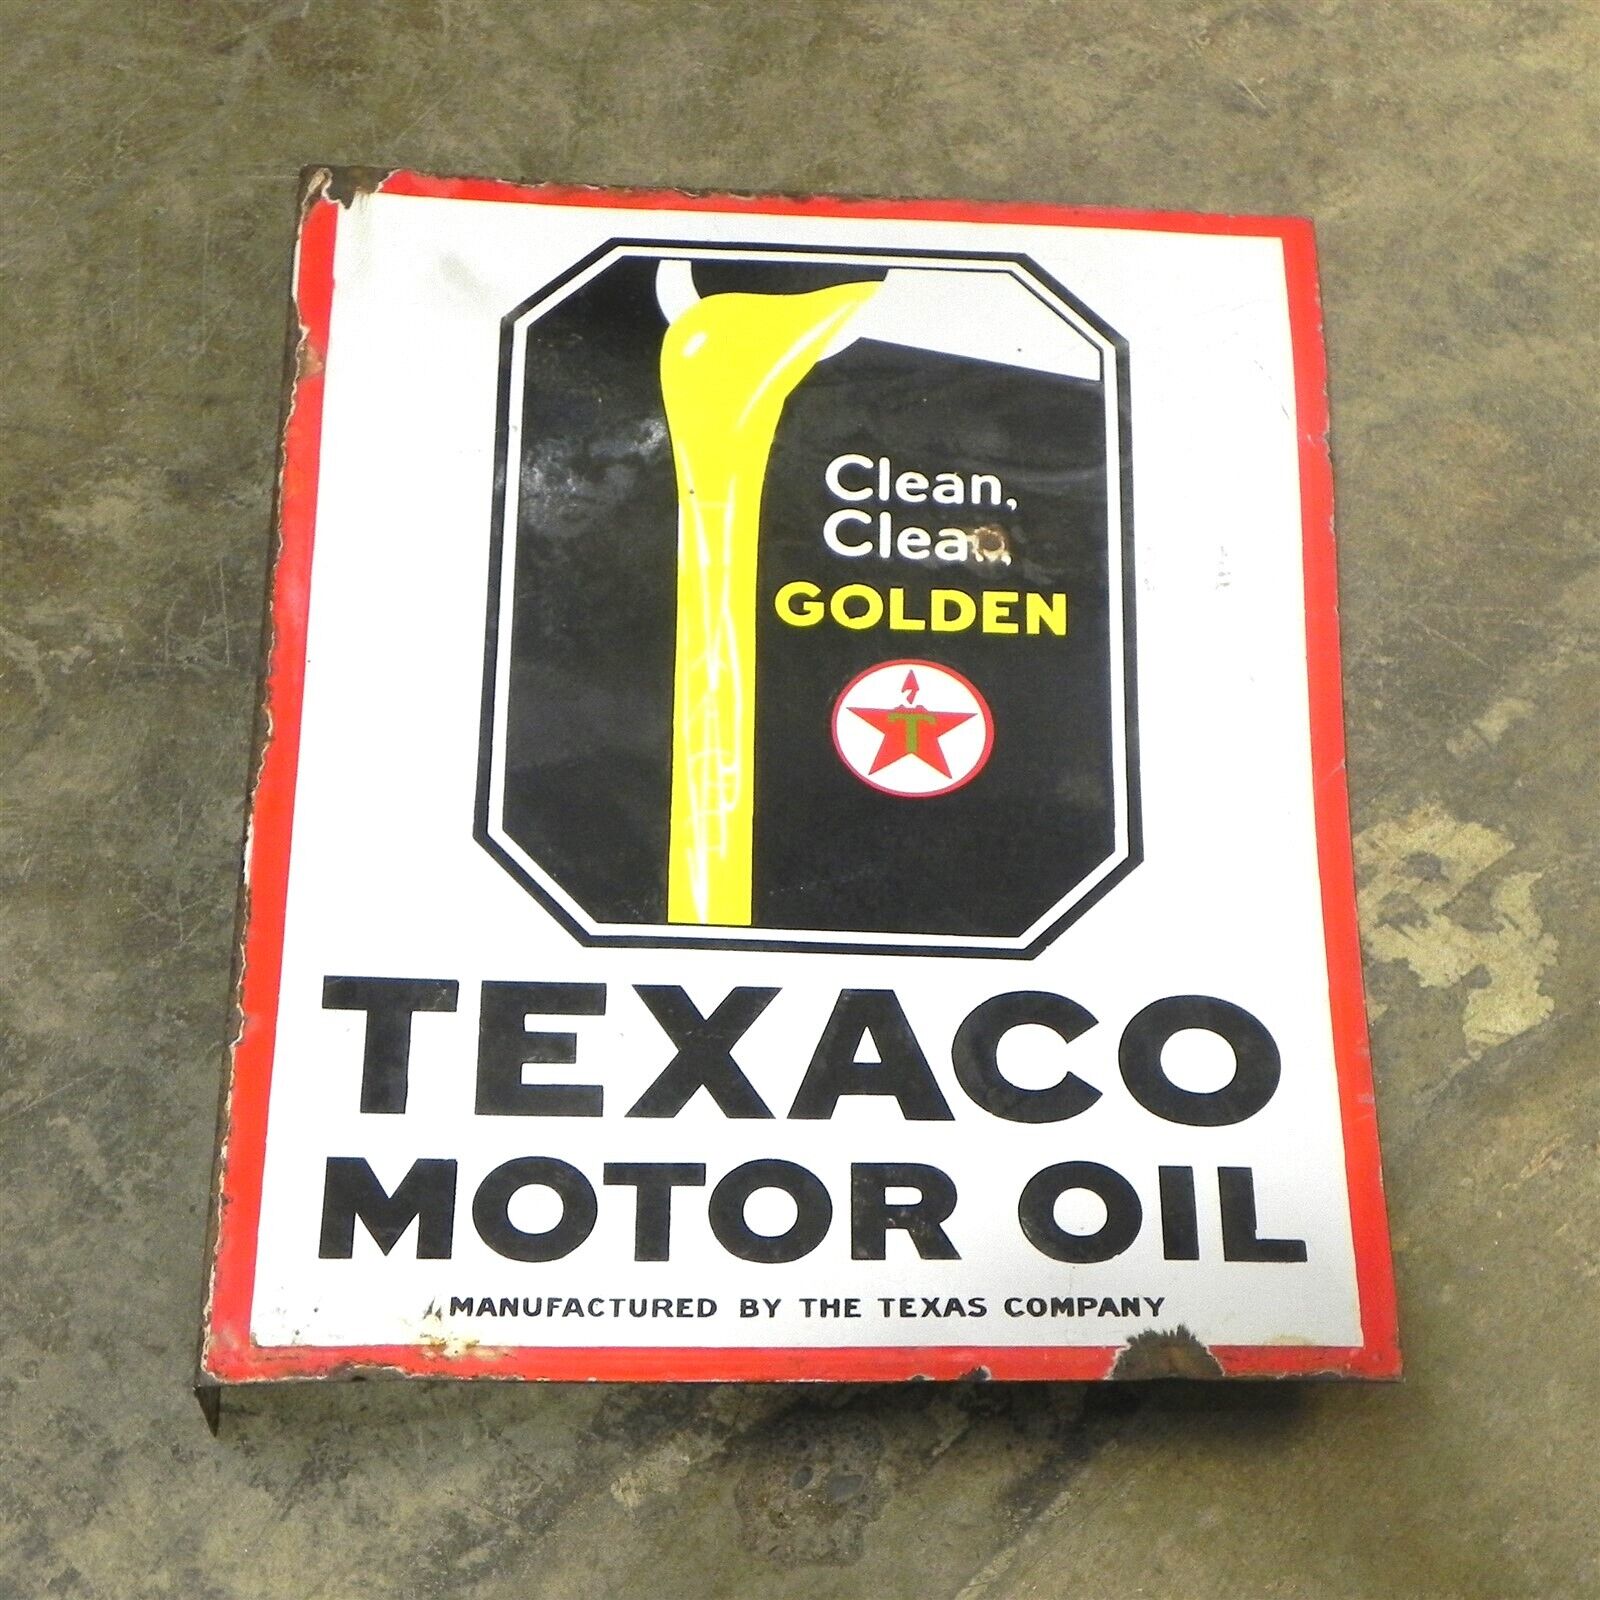 VINTAGE TEXACO MOTOR OIL CLEAN GOLDEN PORCELAIN SIGN DOUBLE SIDED W/FLANGE USED